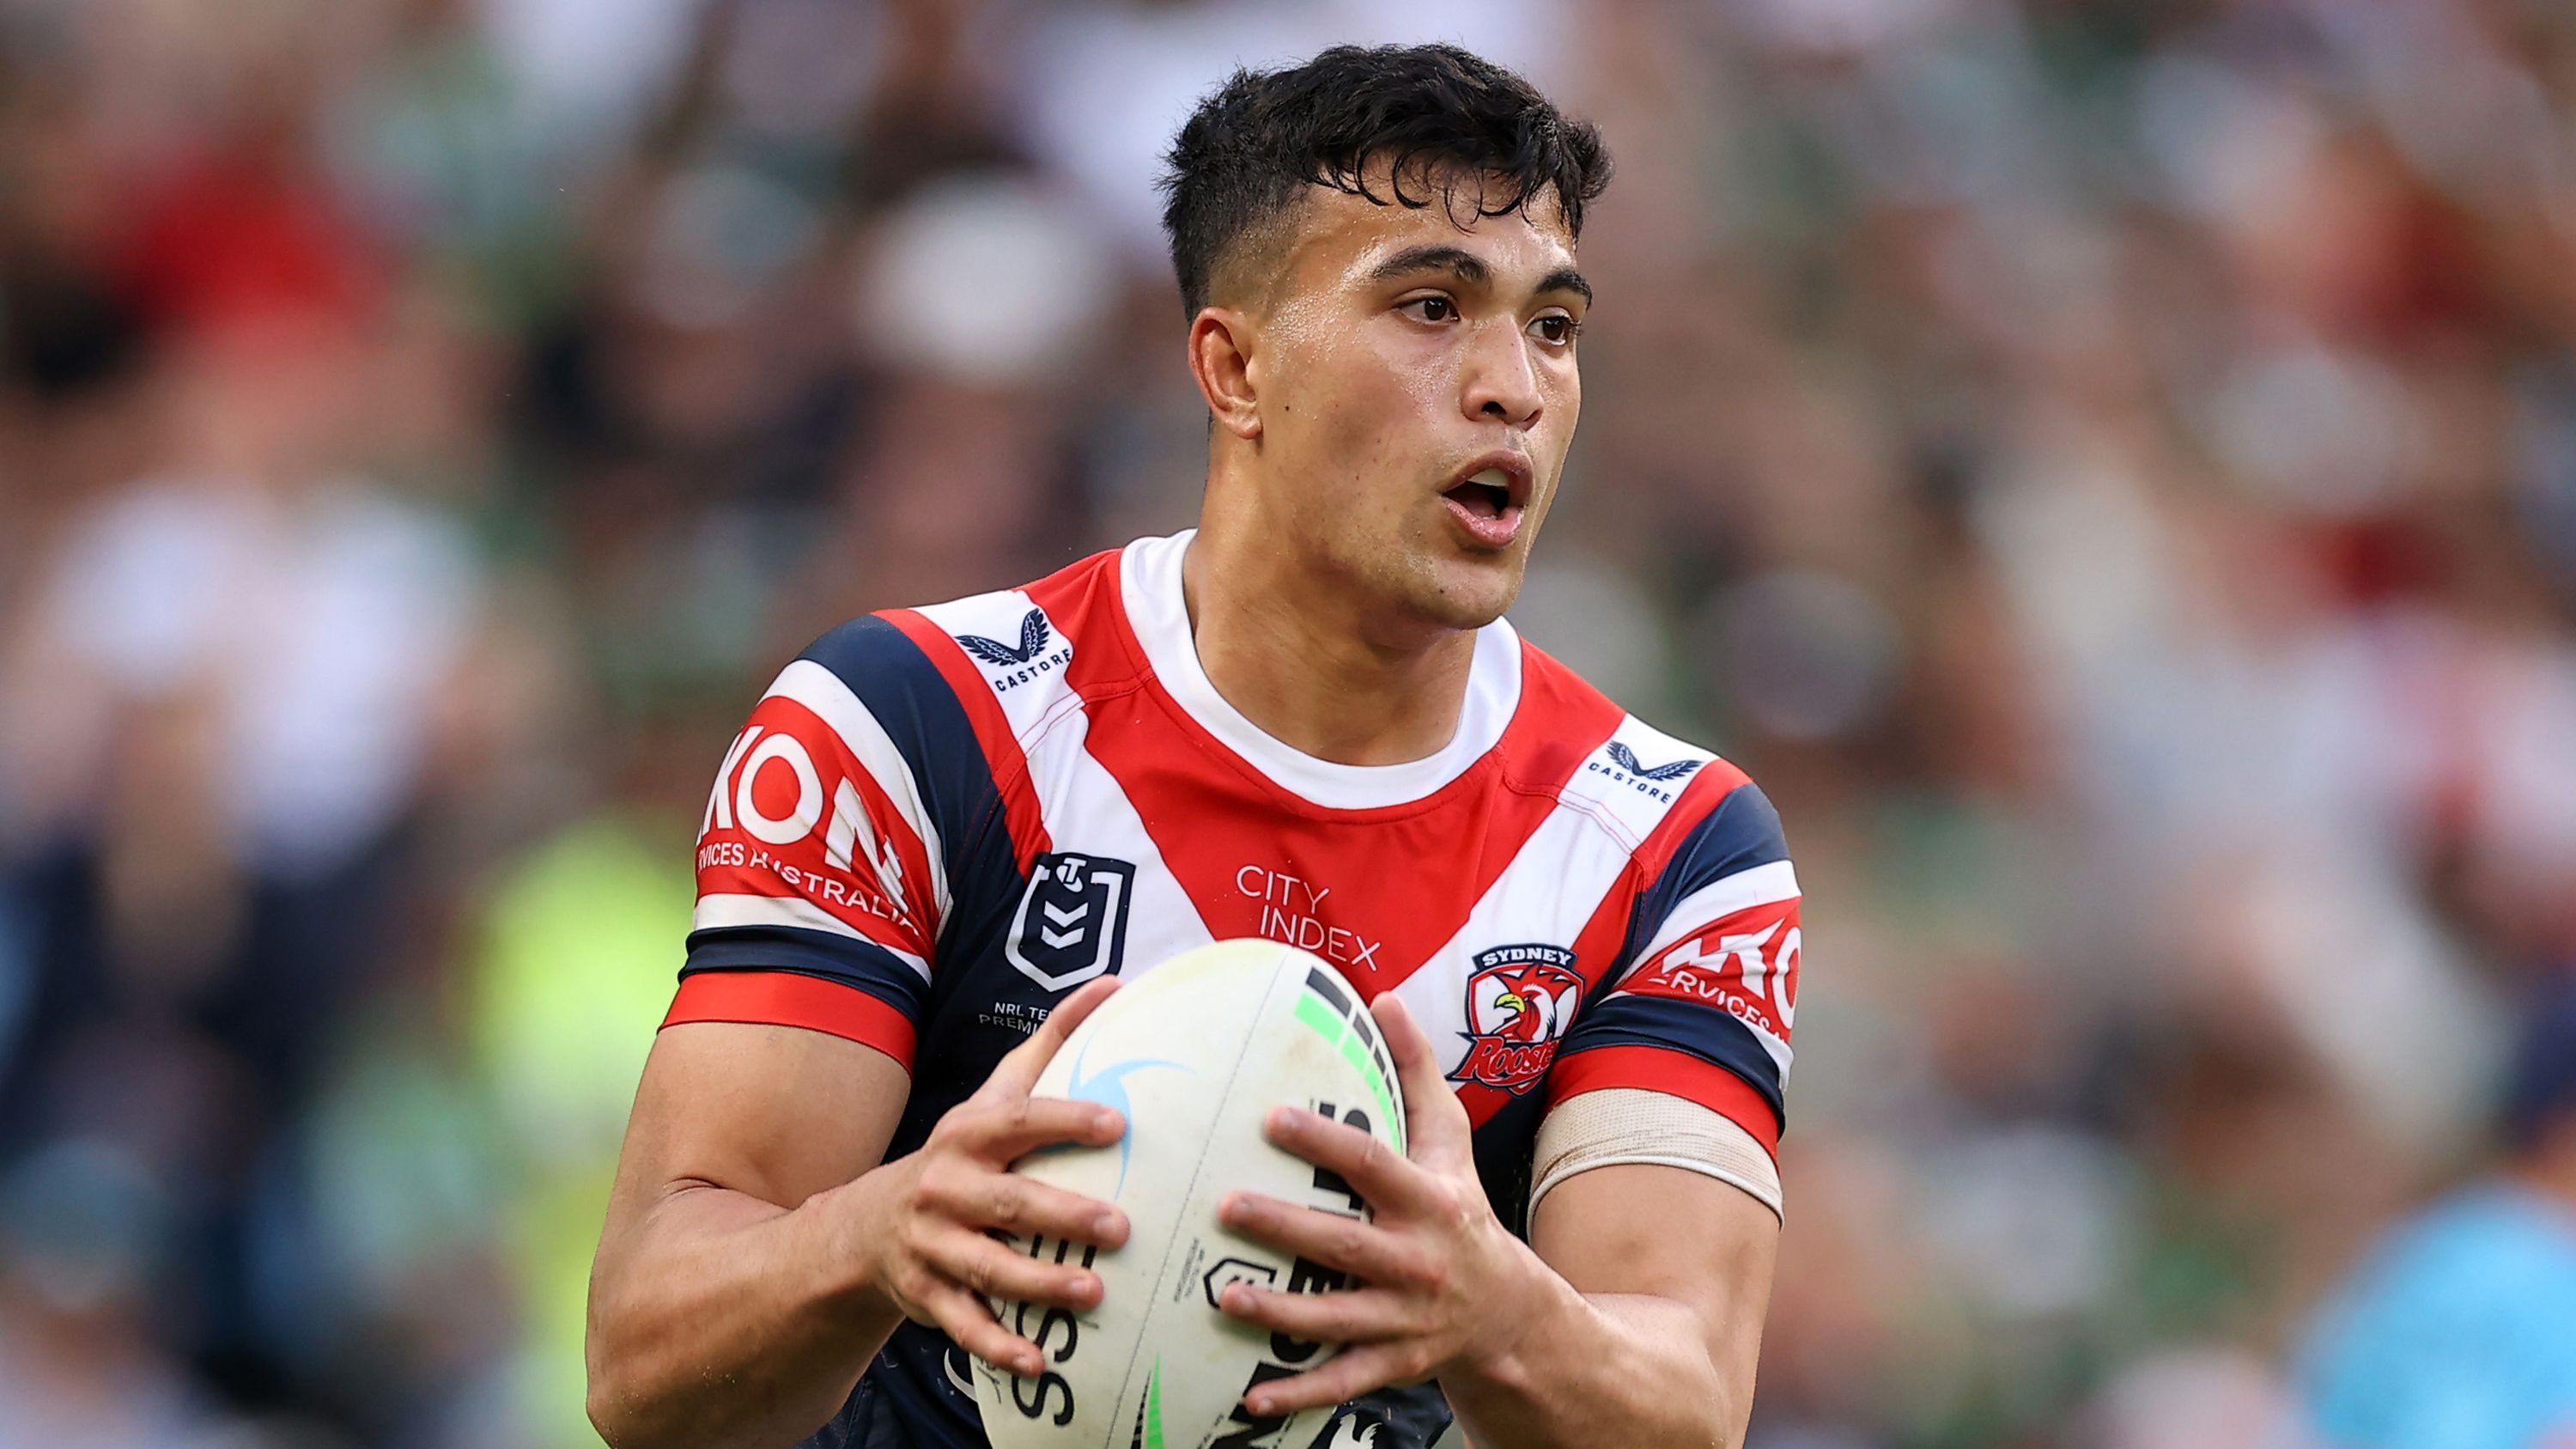 SYDNEY, AUSTRALIA - SEPTEMBER 11: Joseph Suaalii of the Roosters runs the ball during the NRL Elimination Final match between the Sydney Roosters and the South Sydney Rabbitohs at Allianz Stadium on September 11, 2022 in Sydney, Australia. (Photo by Mark Kolbe/Getty Images)